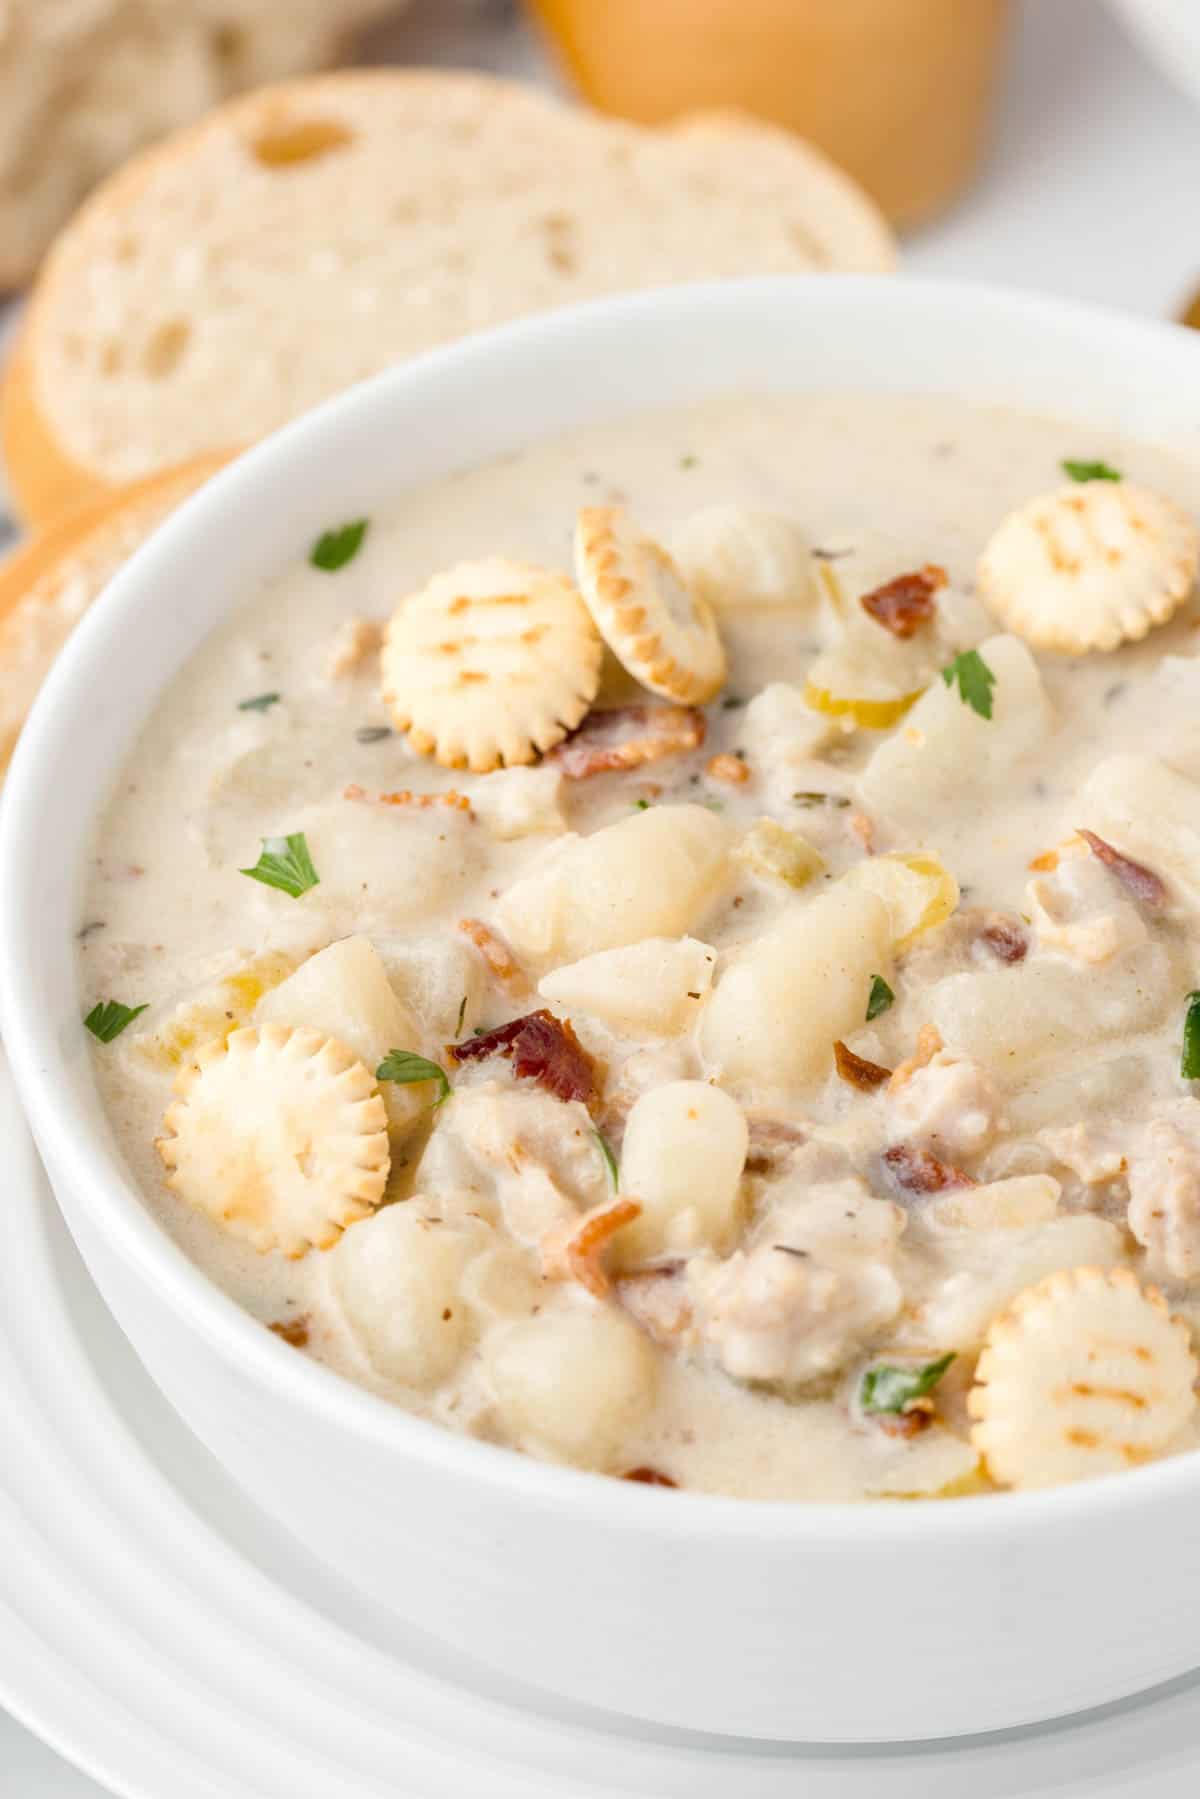 Old Fashioned New England Clam Chowder is a hearty, creamy soup loaded with bacon, potatoes and clams.